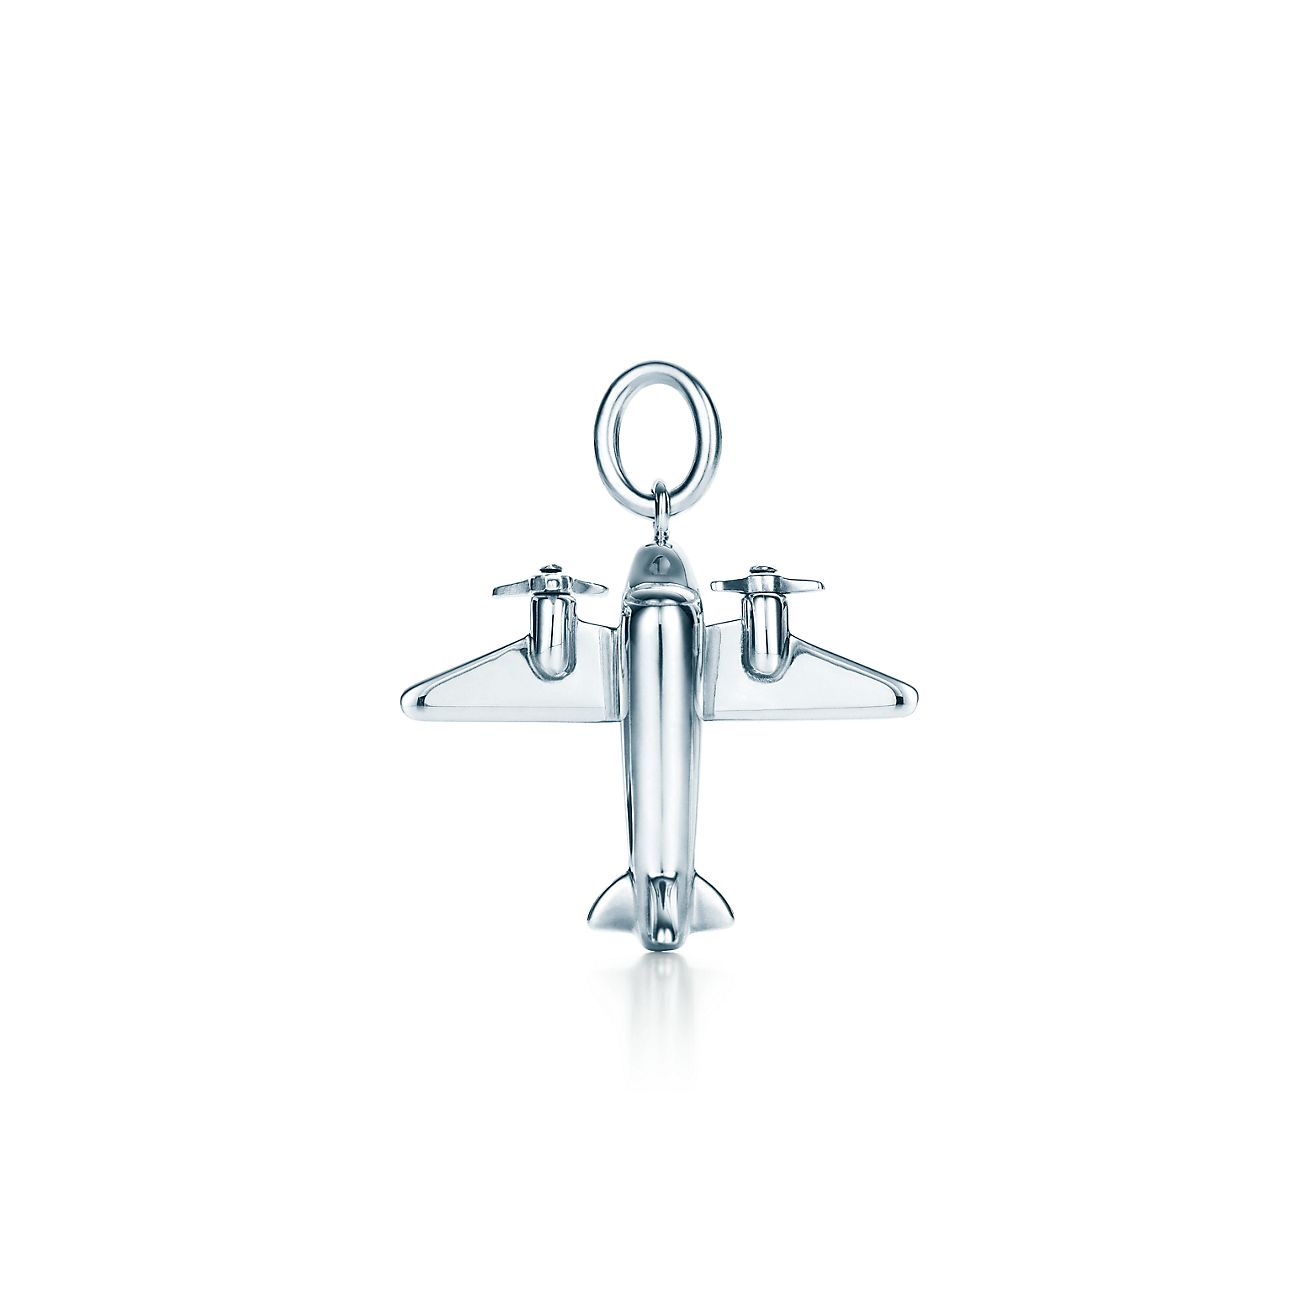 tiffany airplane necklace